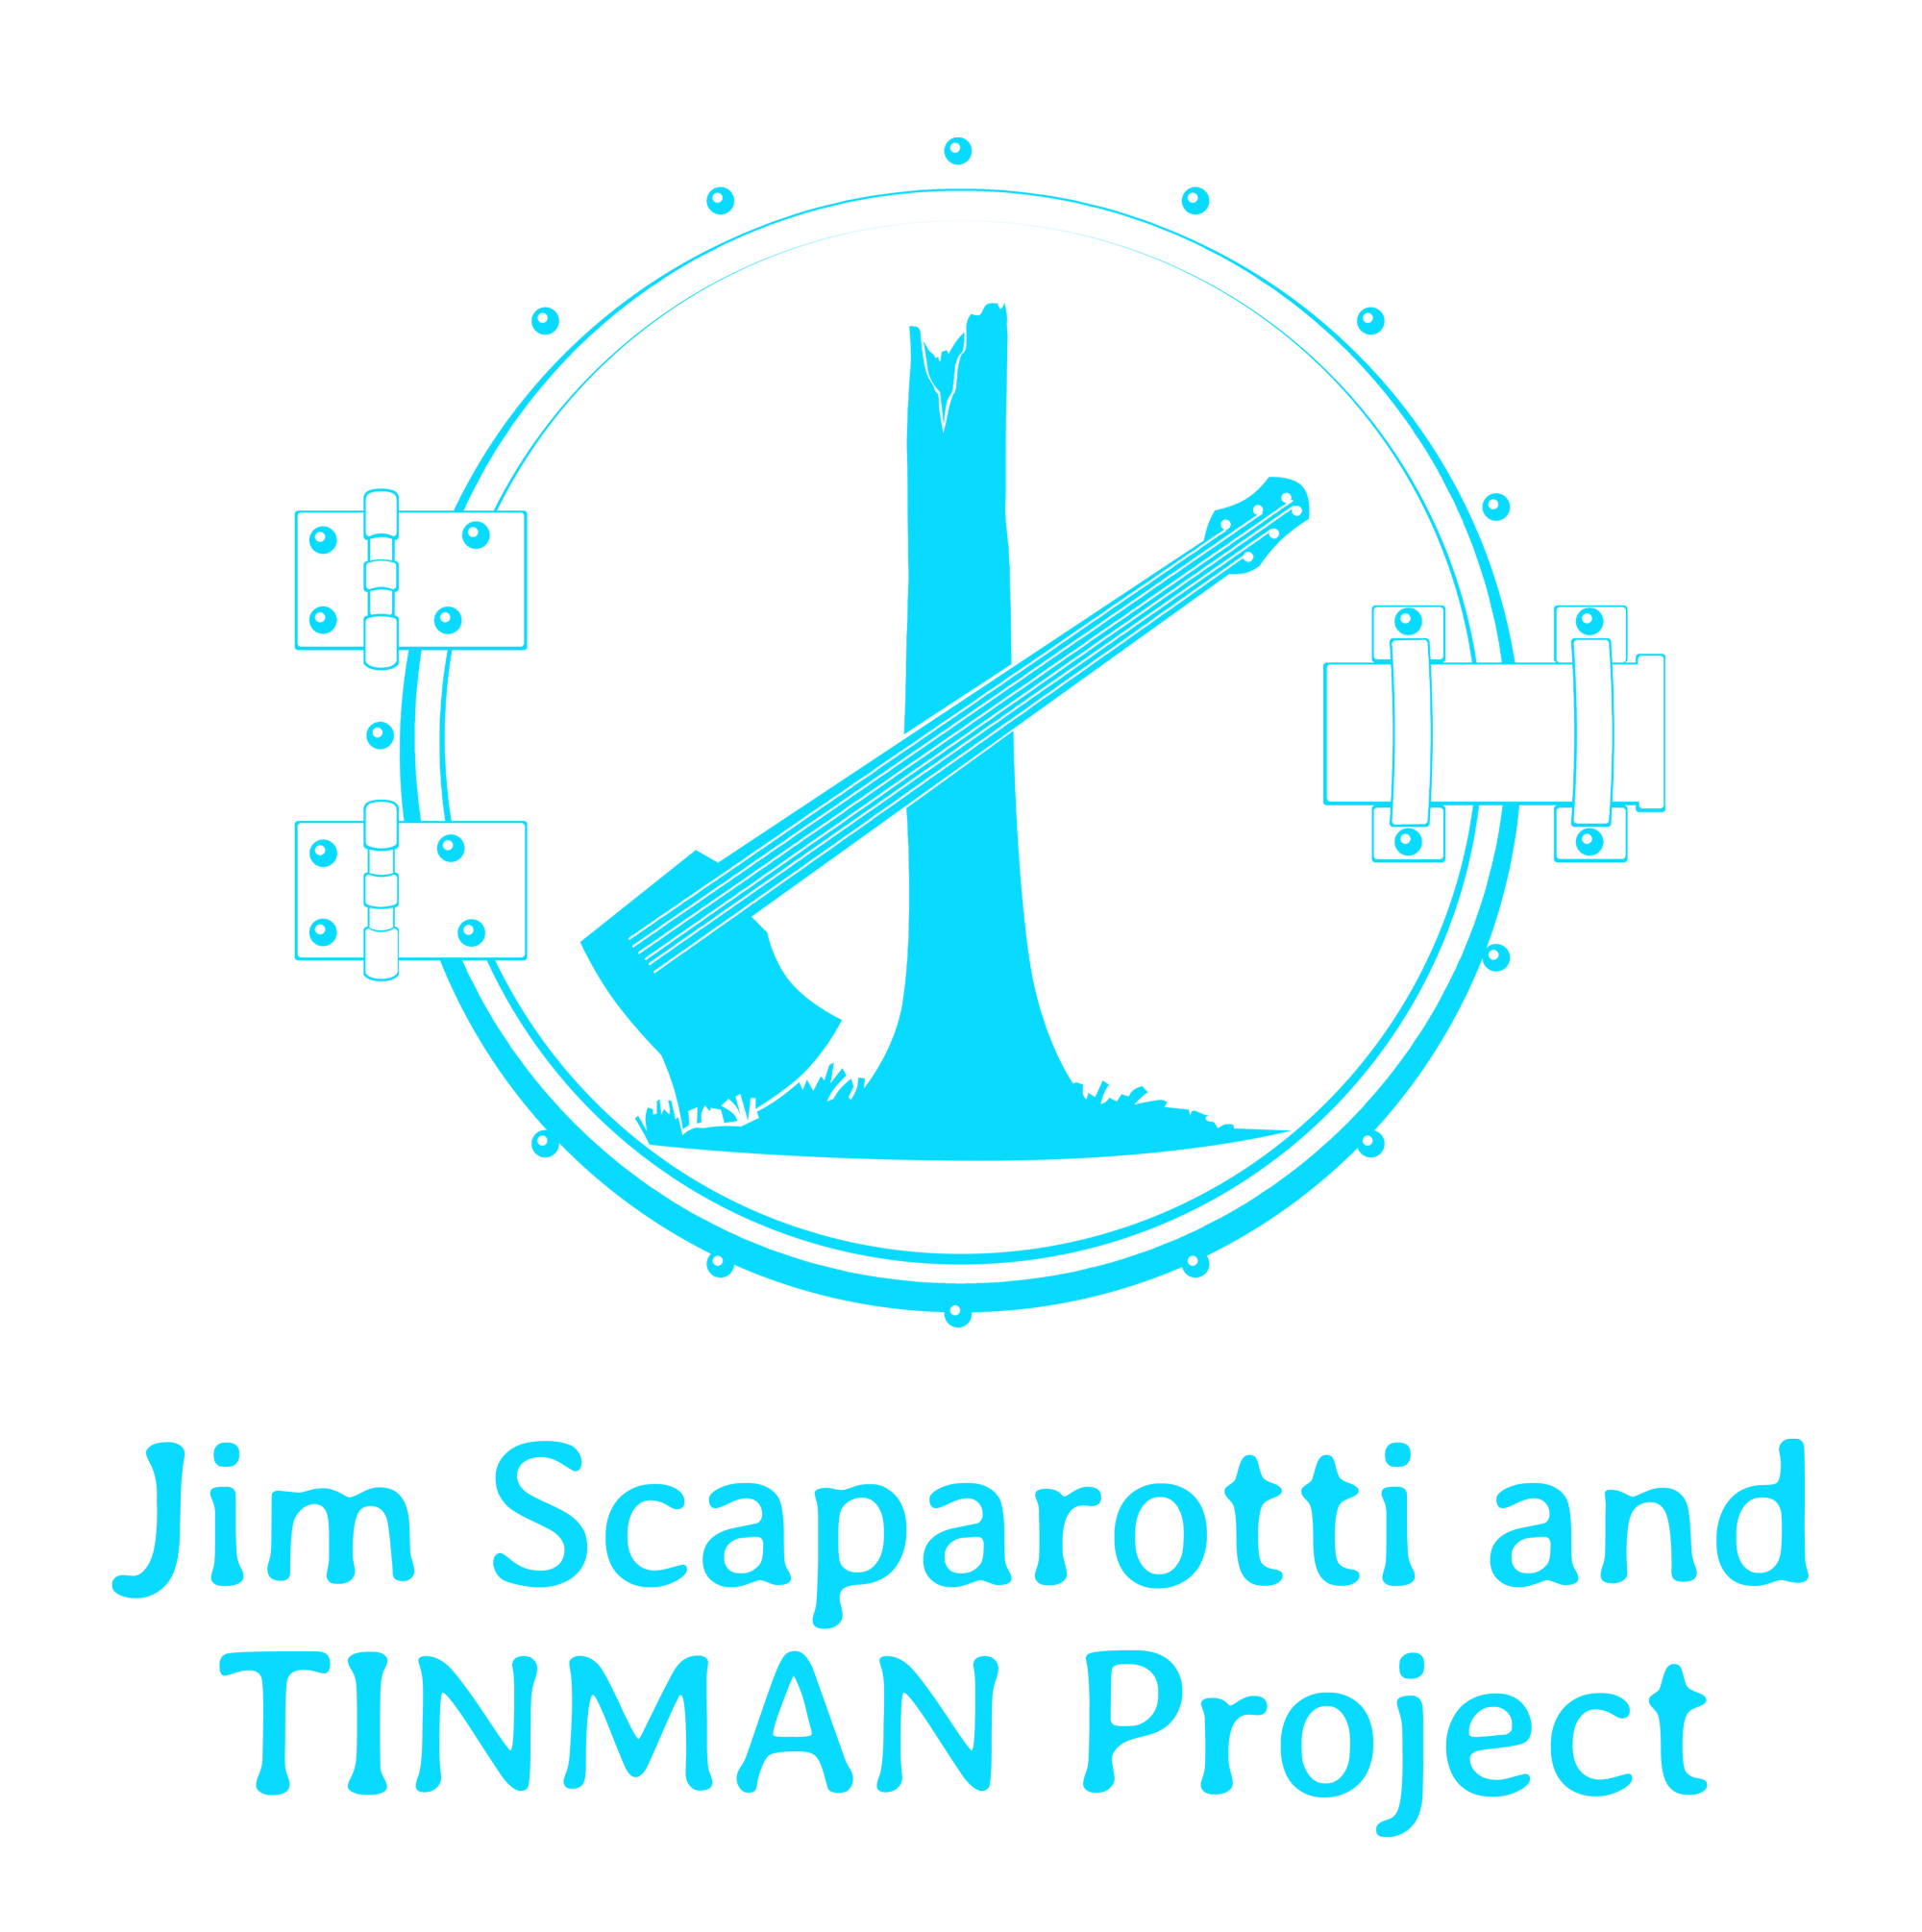 Jim Scaparotti and Tinman Project